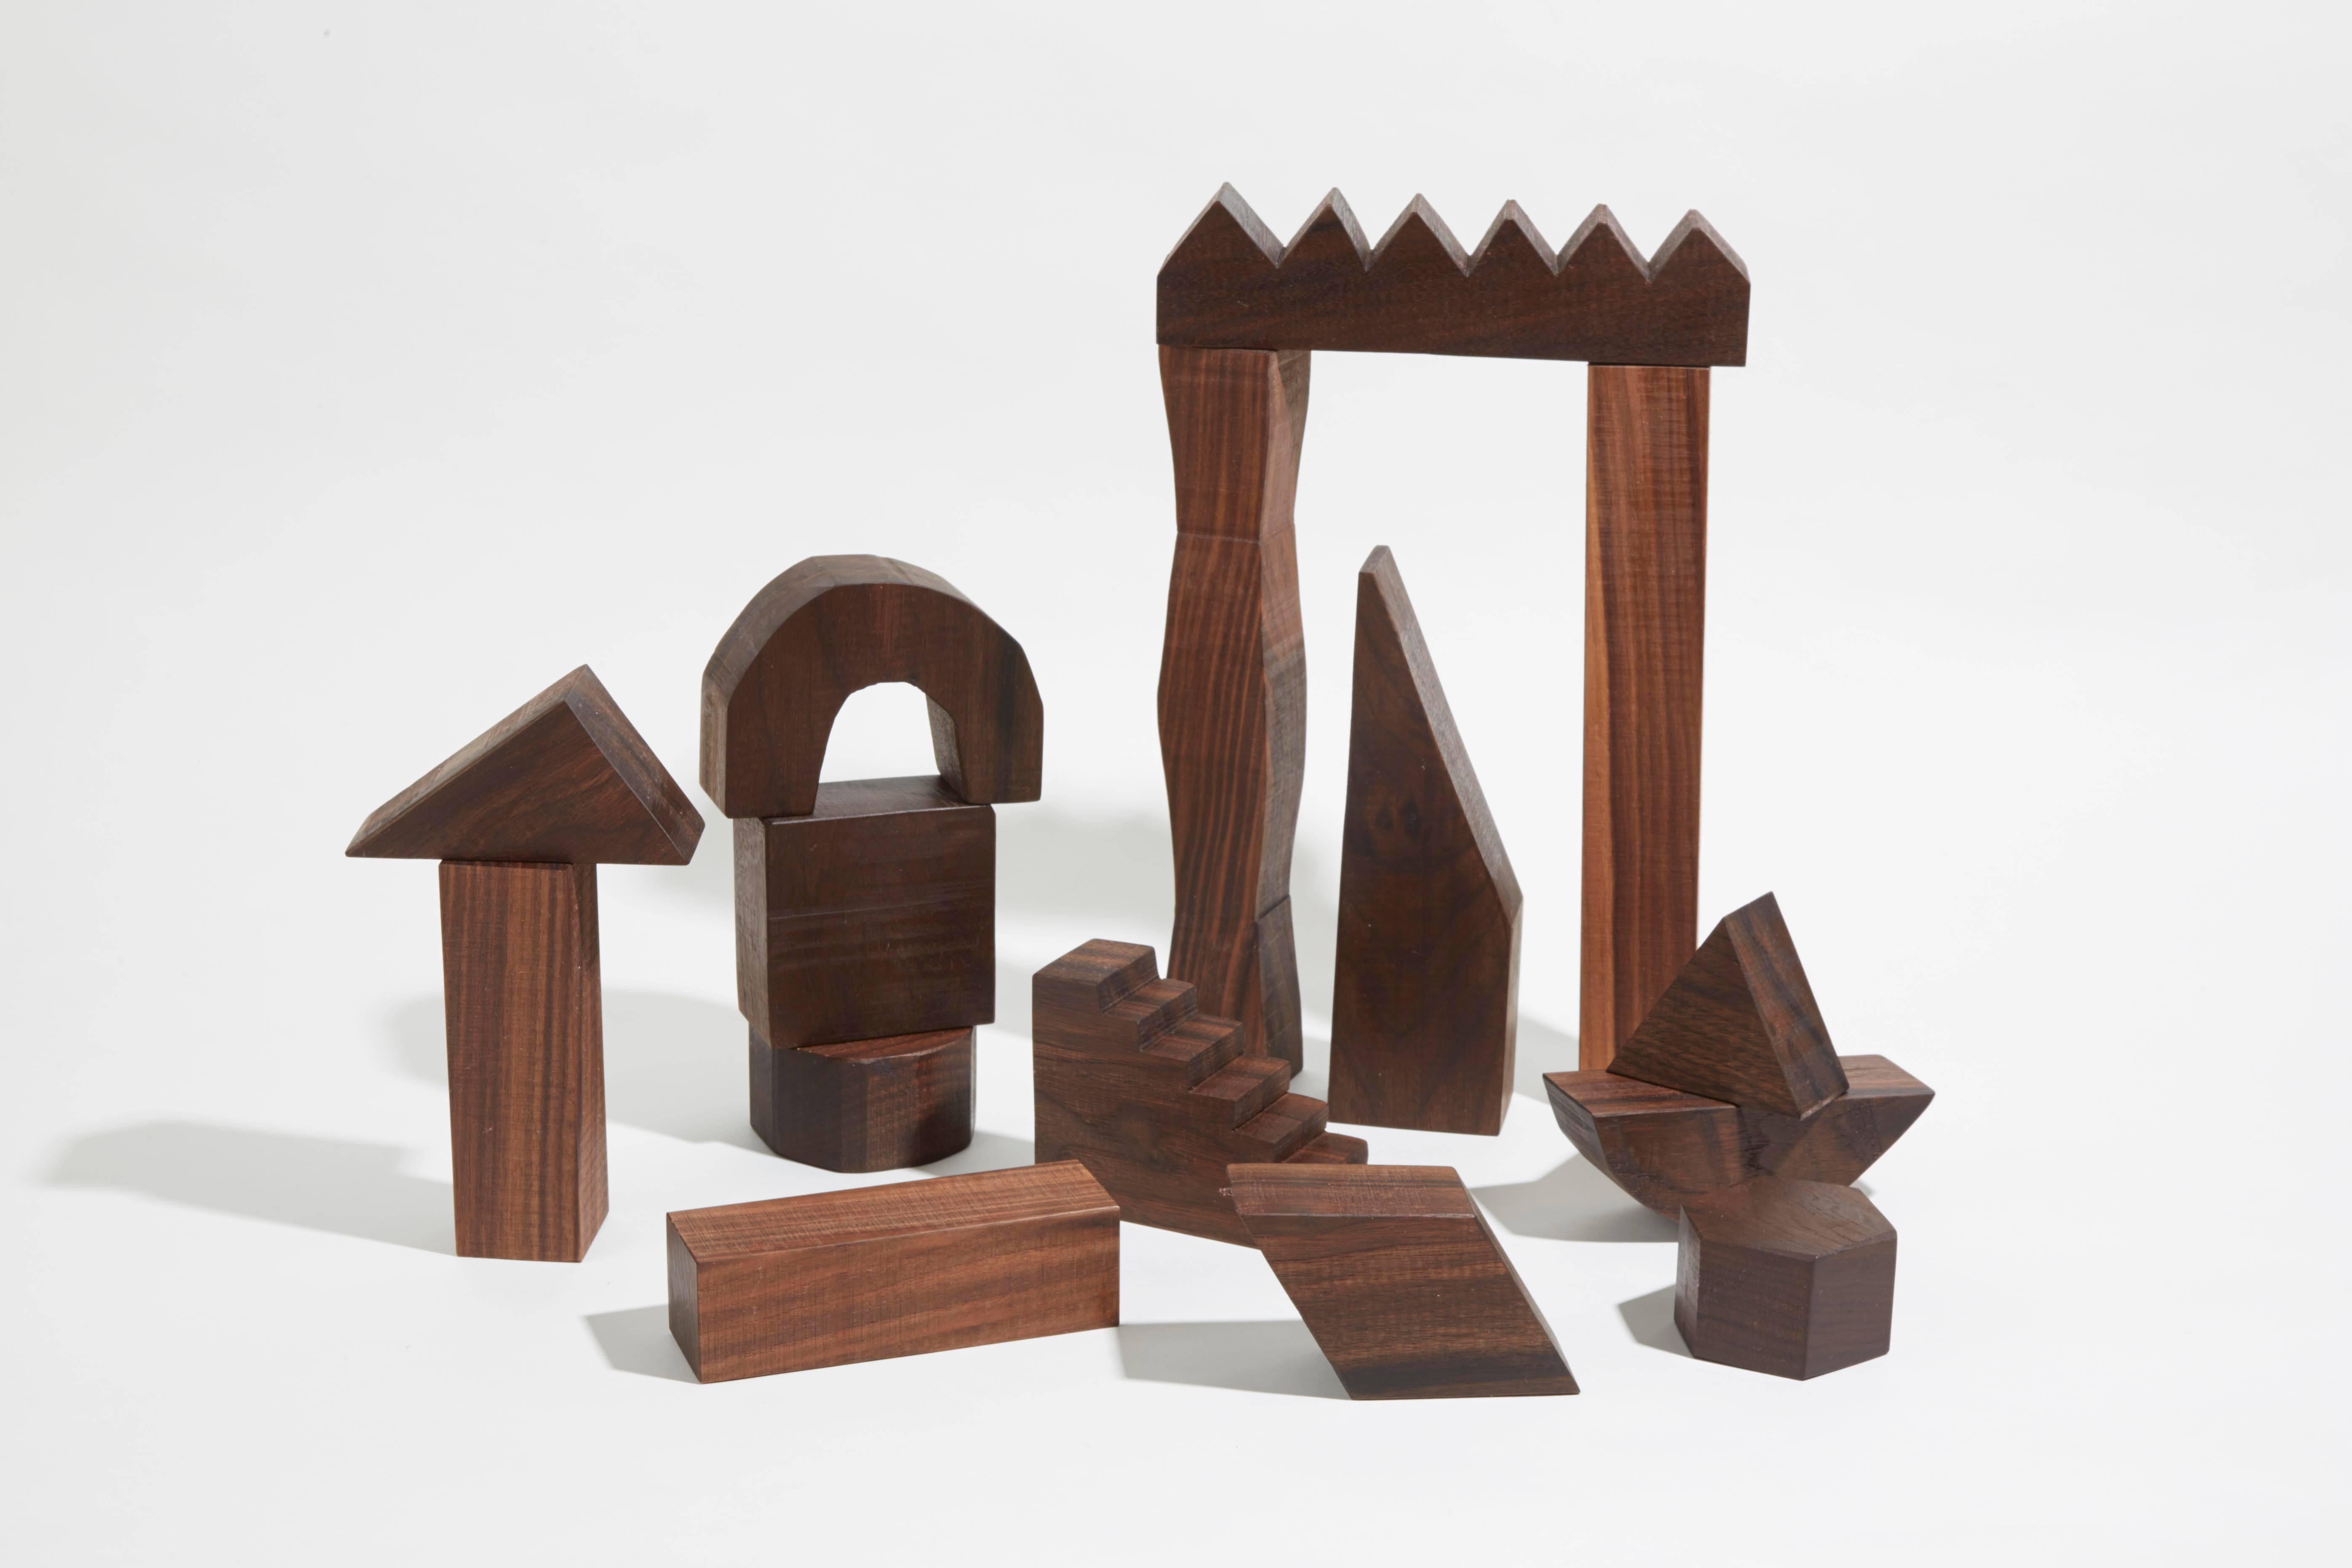 Sculptural Walnut Building Blocks by Fort Makers

Noah Spencer / Fort Makers
Brooklyn, NY
2015
Walnut

15 piece set, packaged in a 14